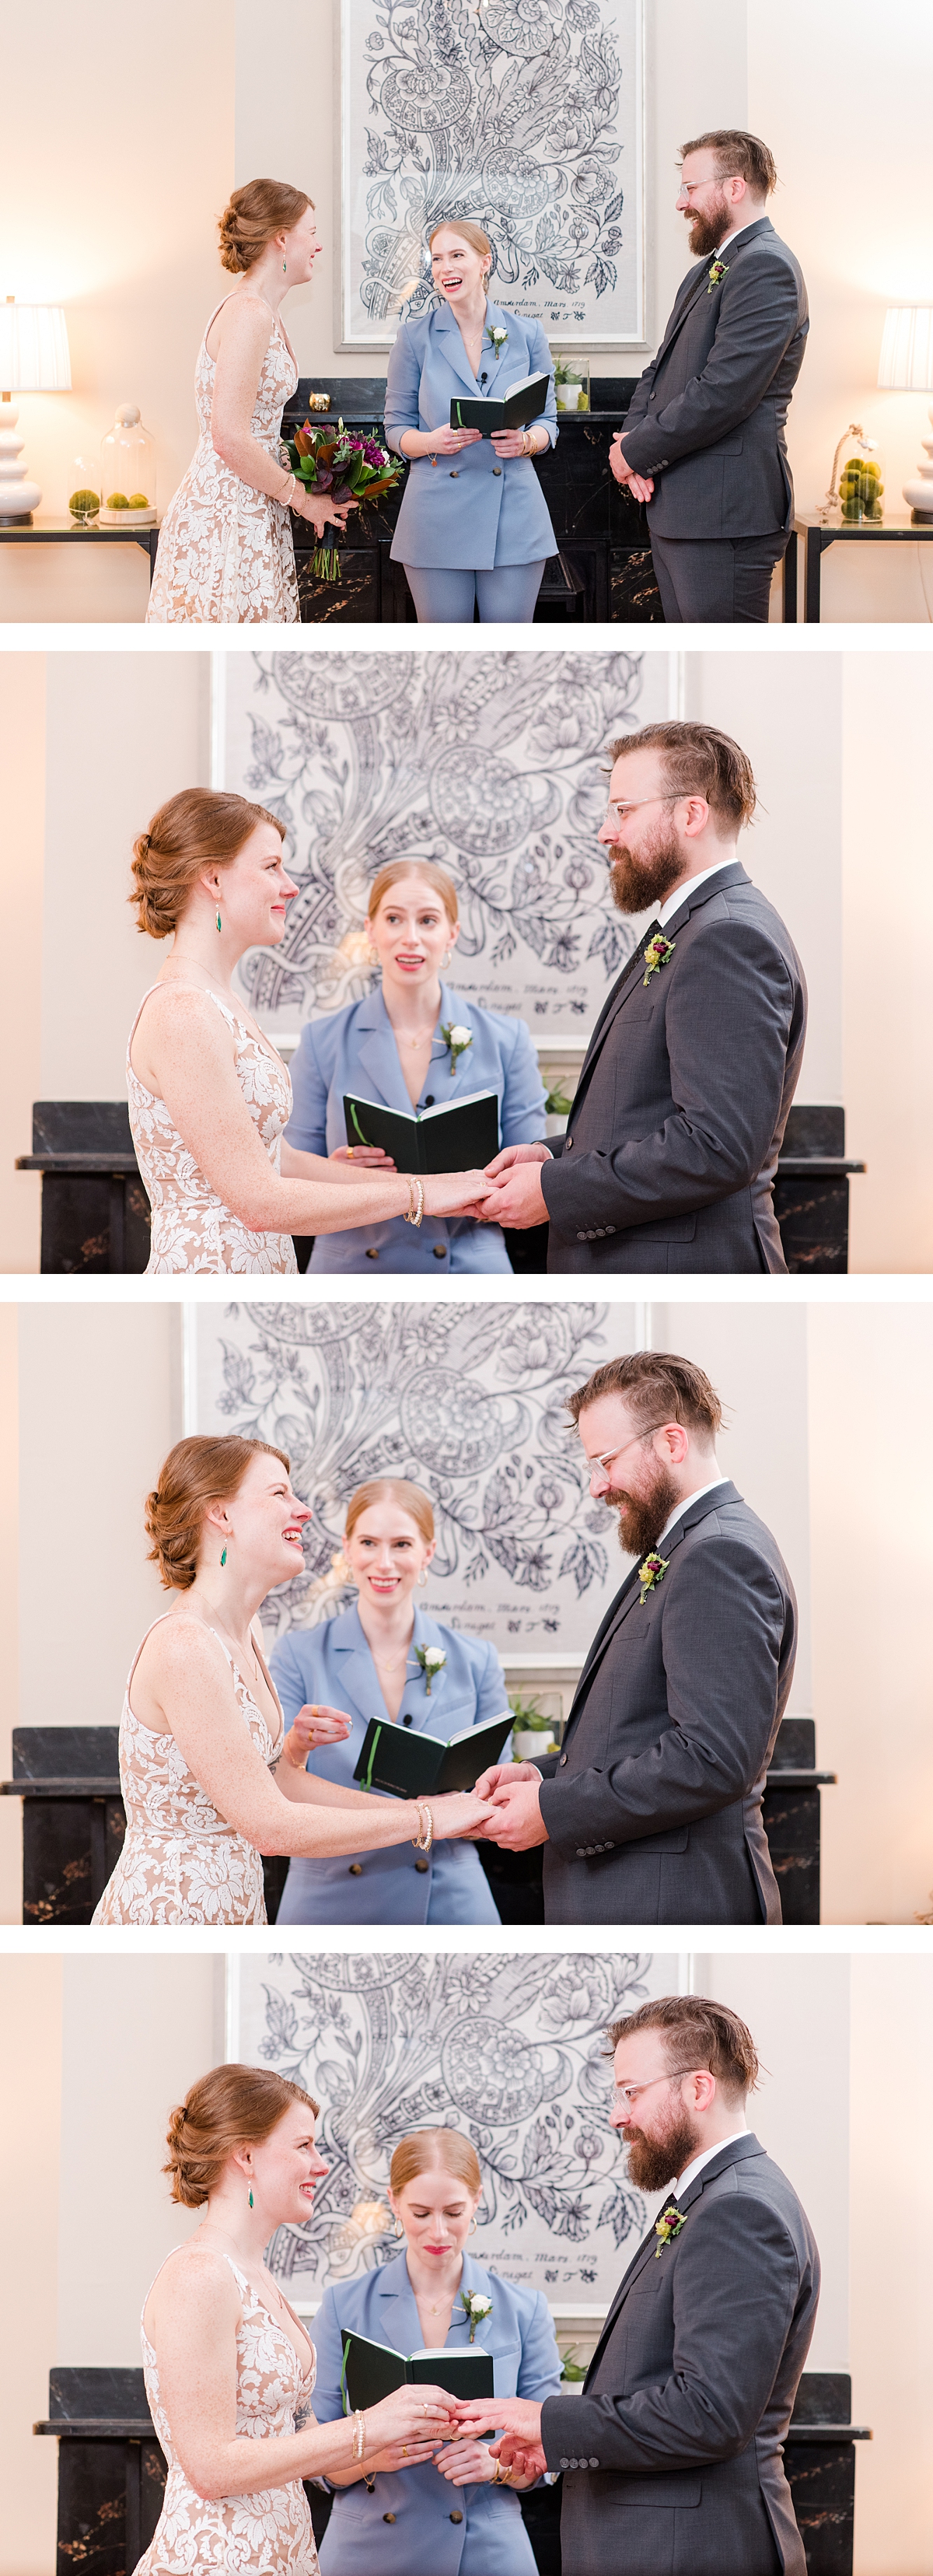 Exchanging Rings at Intimate Richmond Elopement Ceremony. Wedding Photography by Richmond Wedding Photographer Kailey Brianne Photography. 